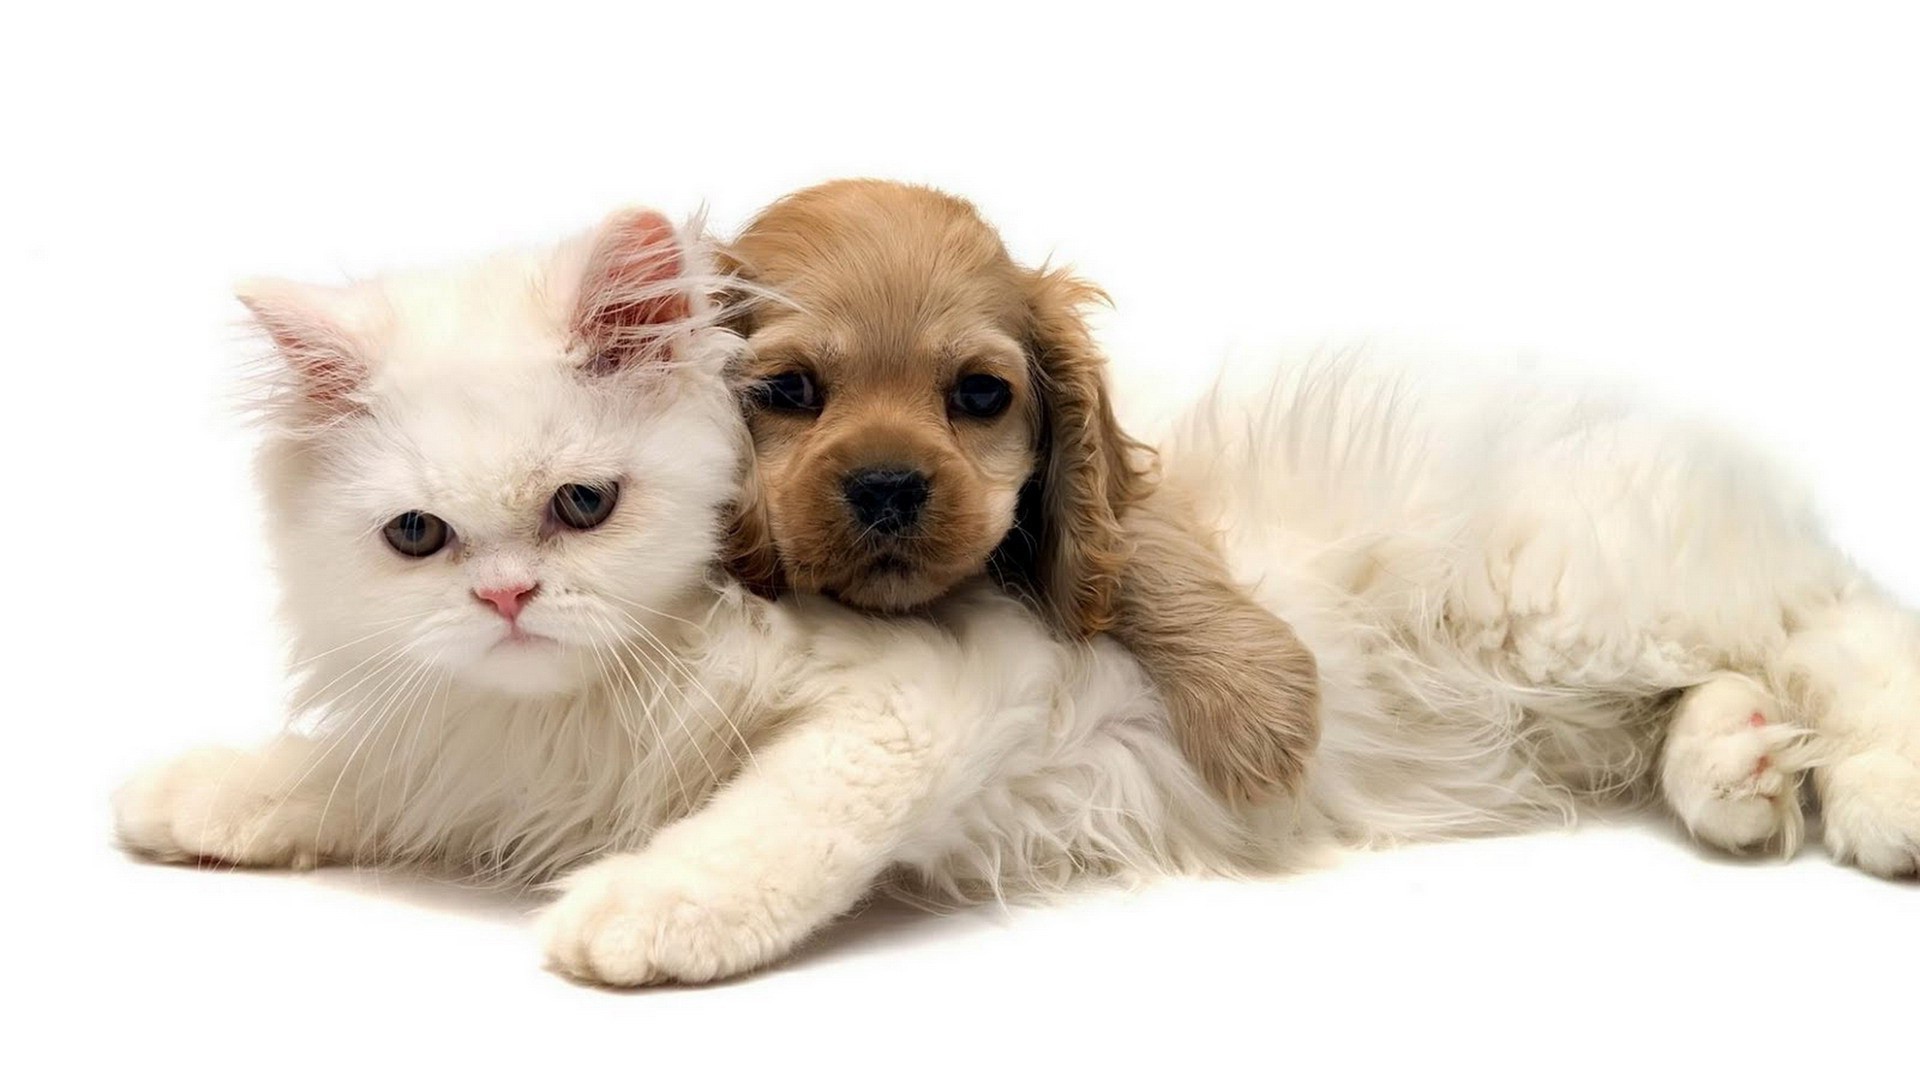 cats and kittens and dogs and puppies images gallery - PETS ...